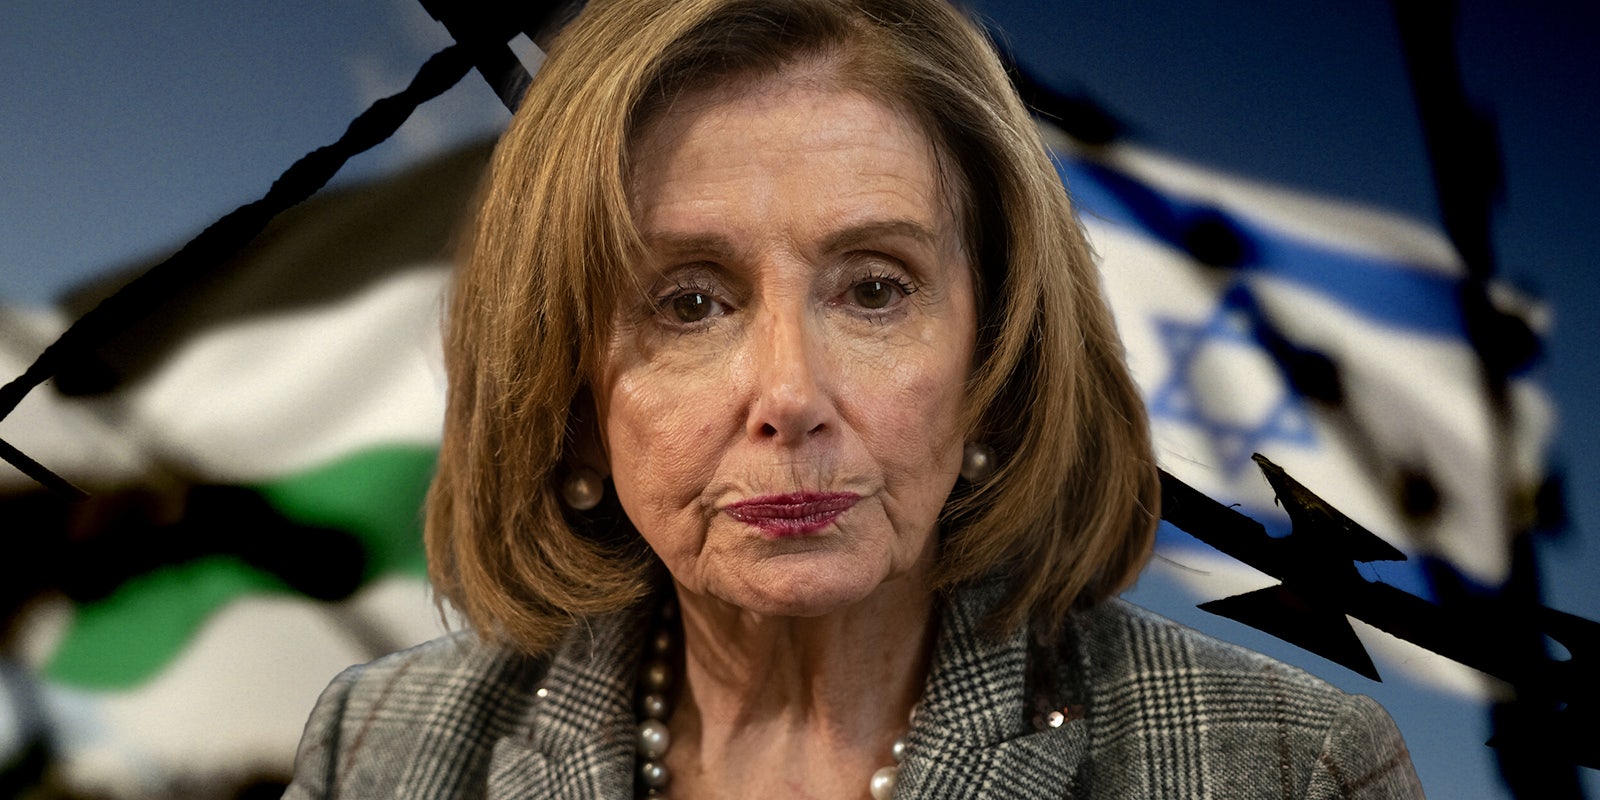 Backlash after pelosi says pro-gaza ceasfire protests could be run by Putin